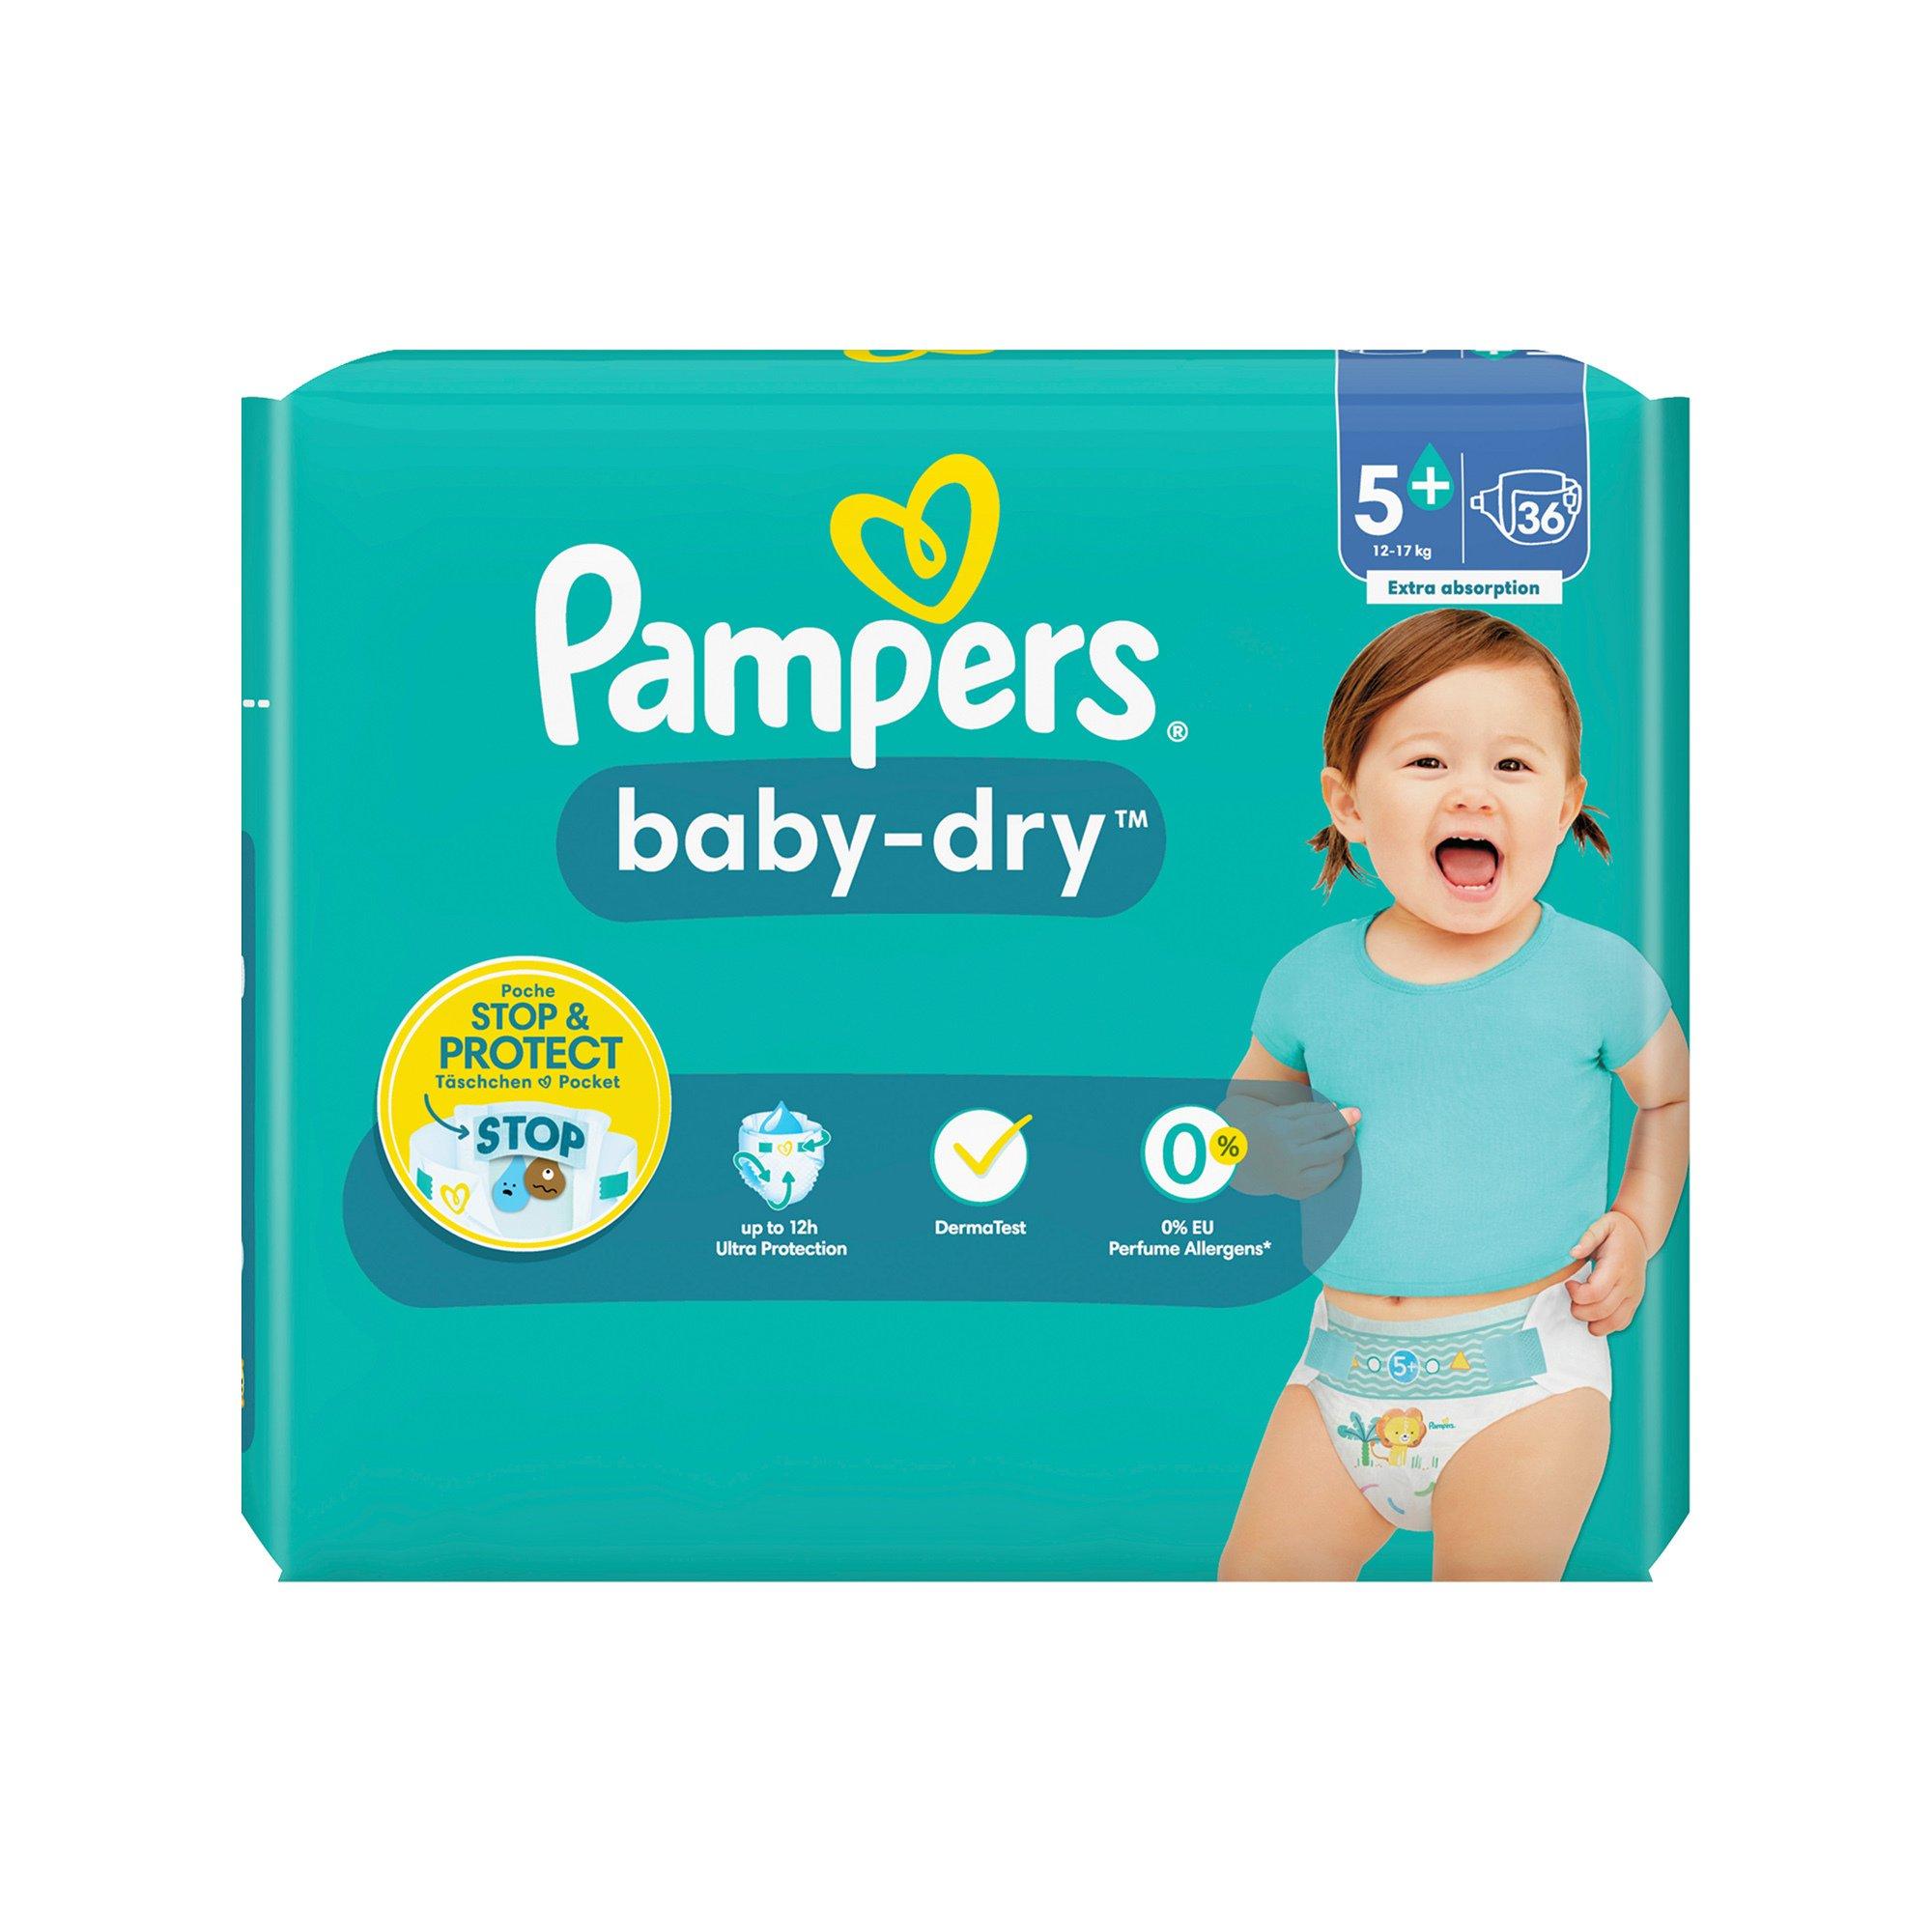 Pampers Premium Protection Taille 5, boîte mensuelle